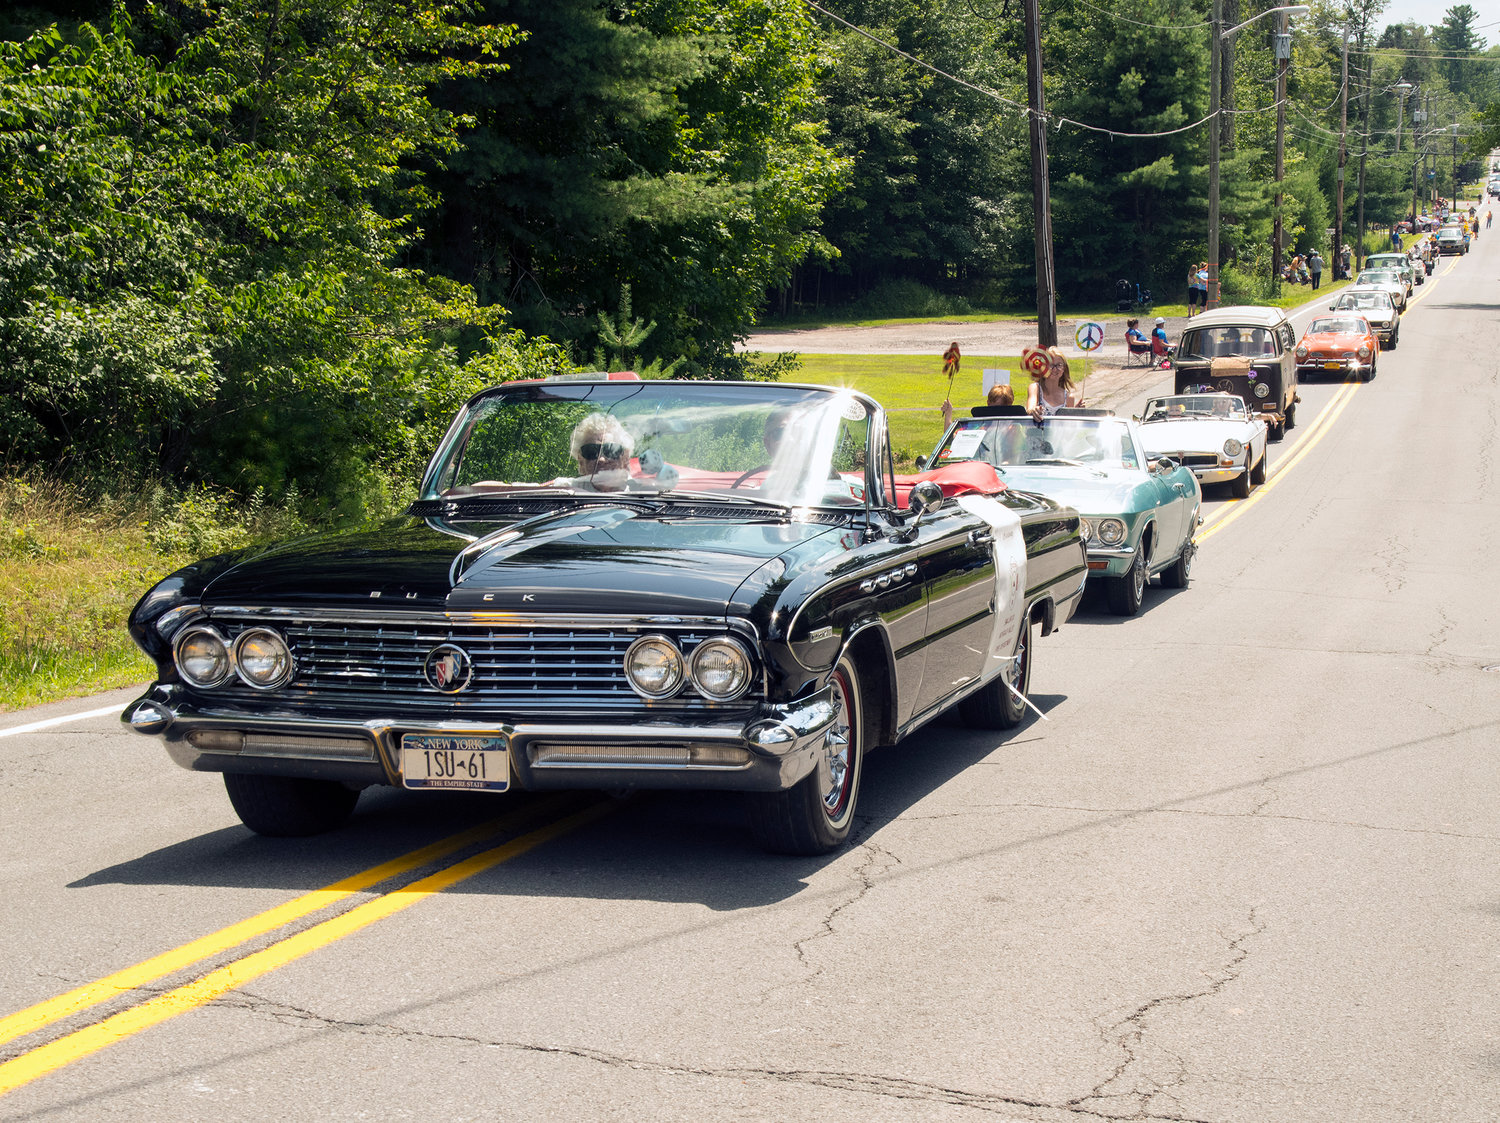 The parade featured a long line of beautiful classic and antique cars ranging from MG’s and Alfa Romeos to old Buicks and VW Buses.